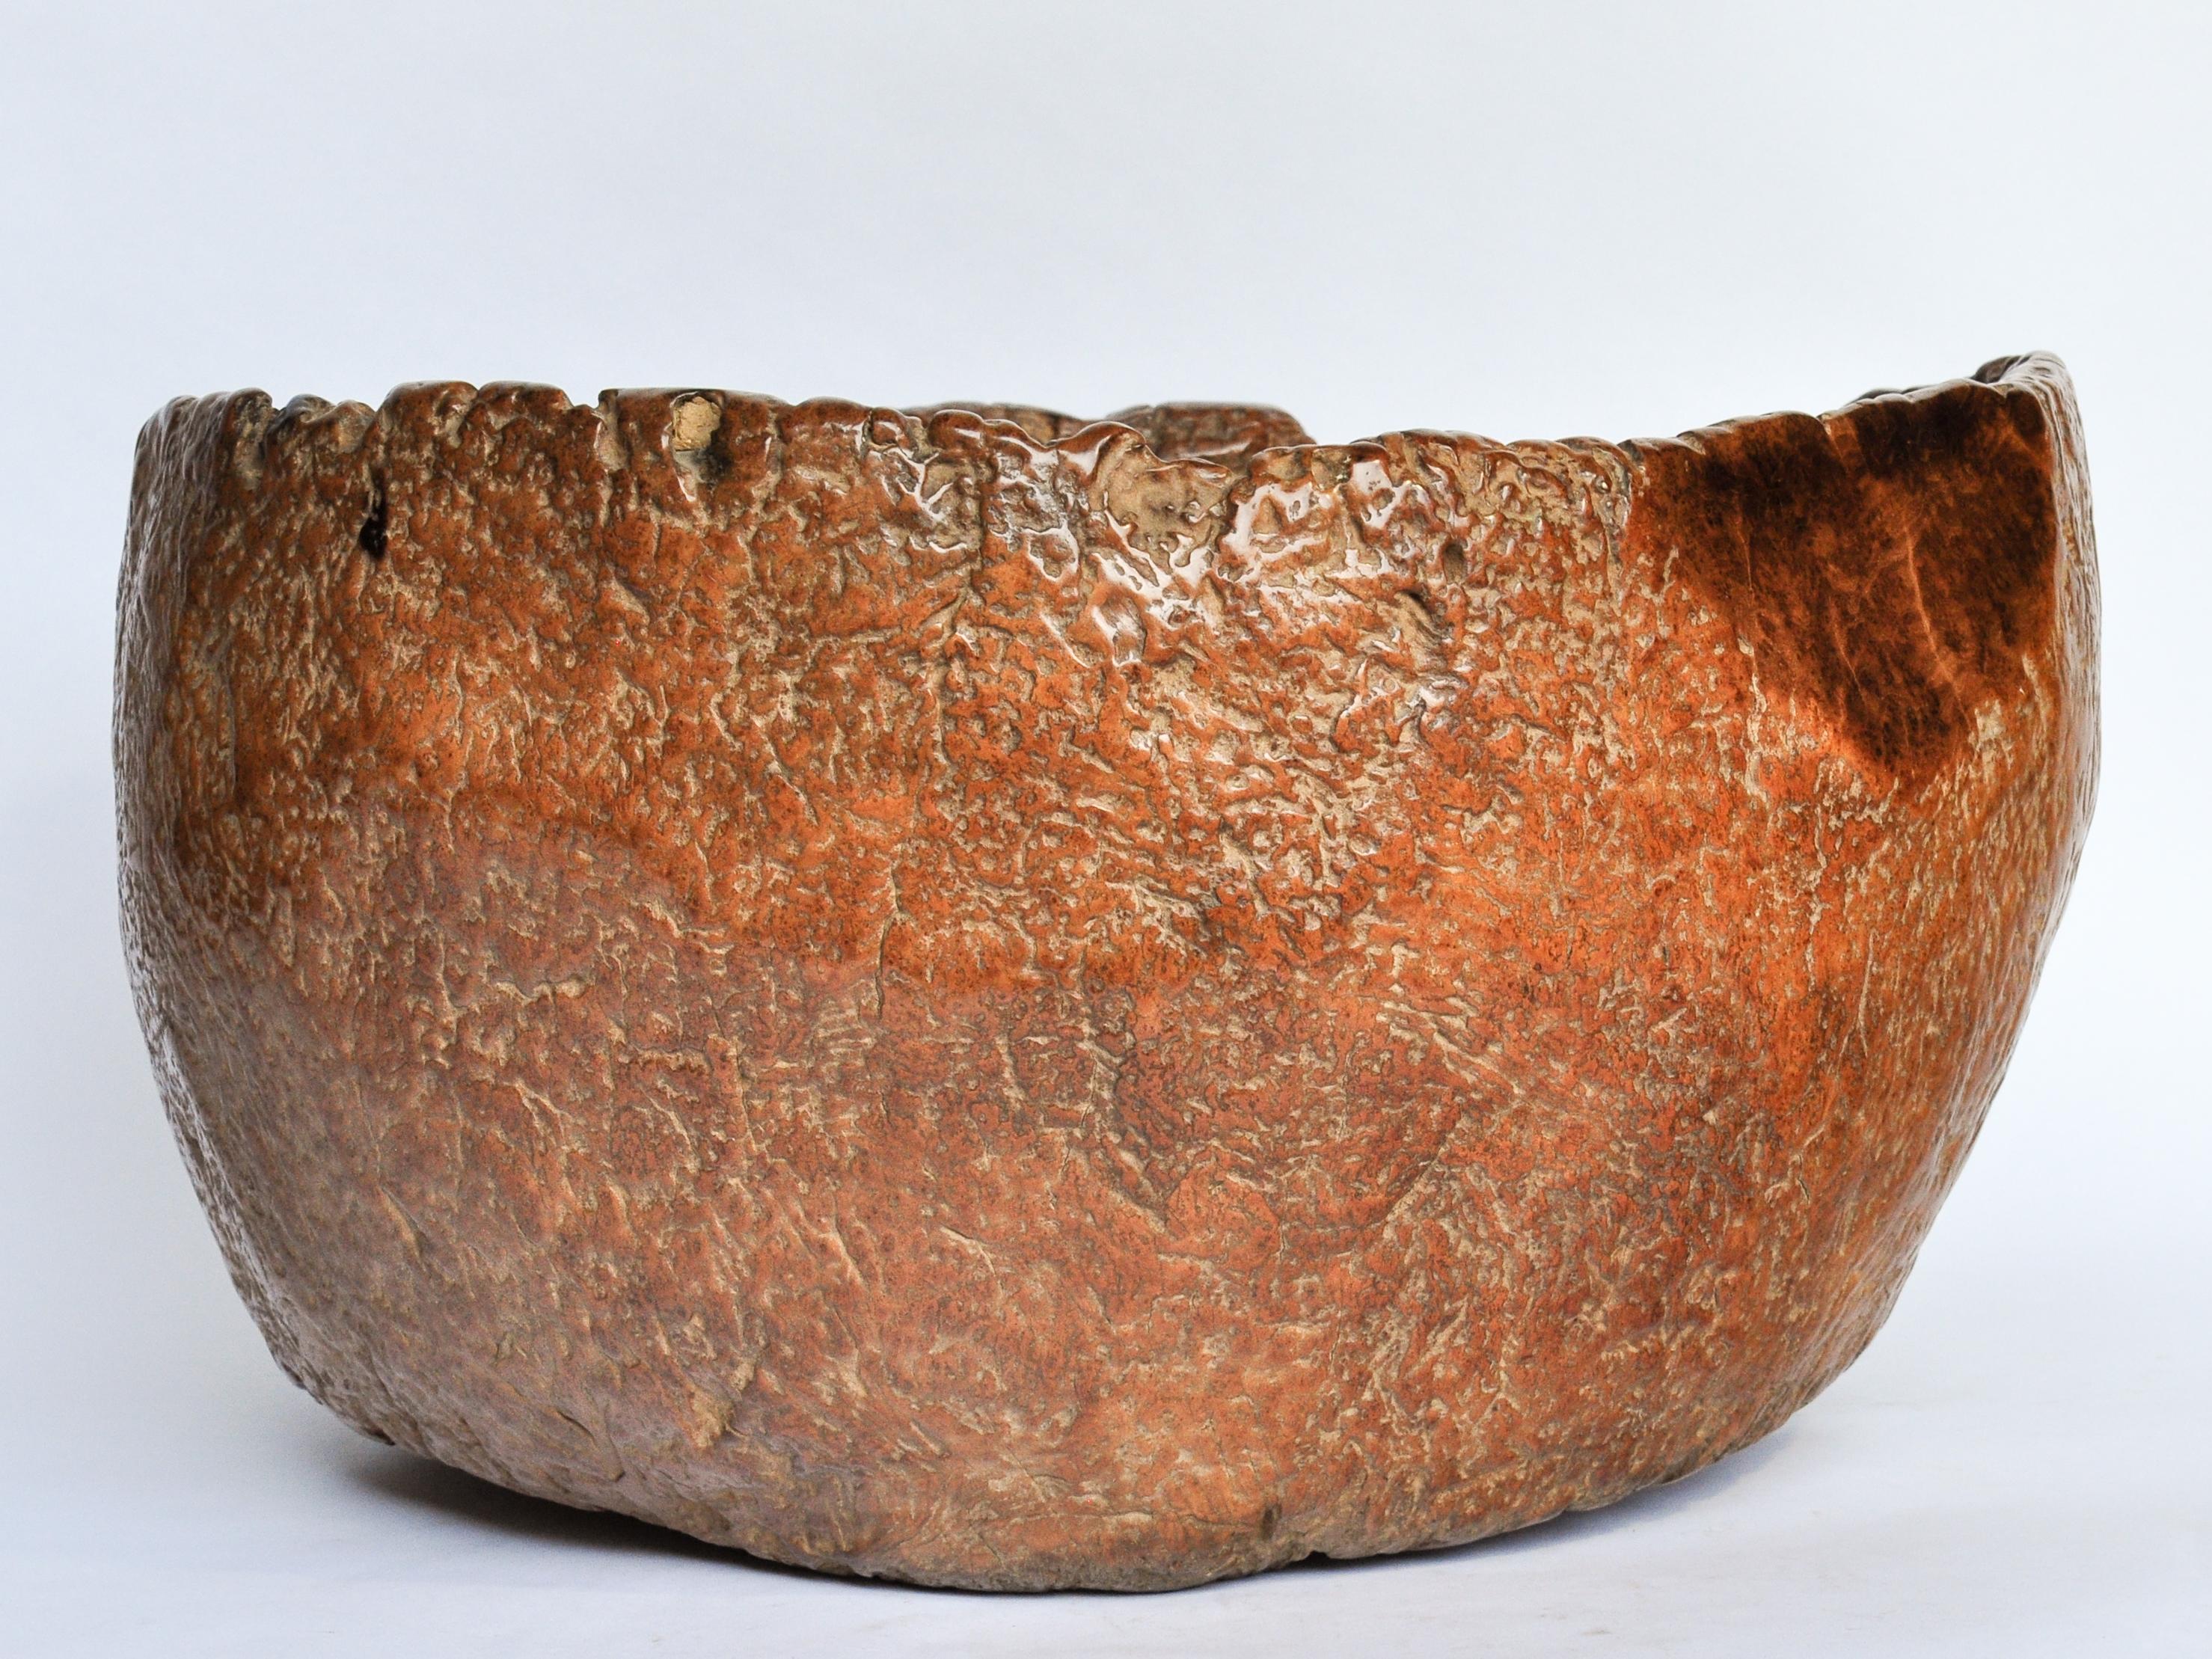 Hand-Carved Teak Burl Planter / Bowl Eroded Bottom, Madura, Java, Early to Mid-20th Century